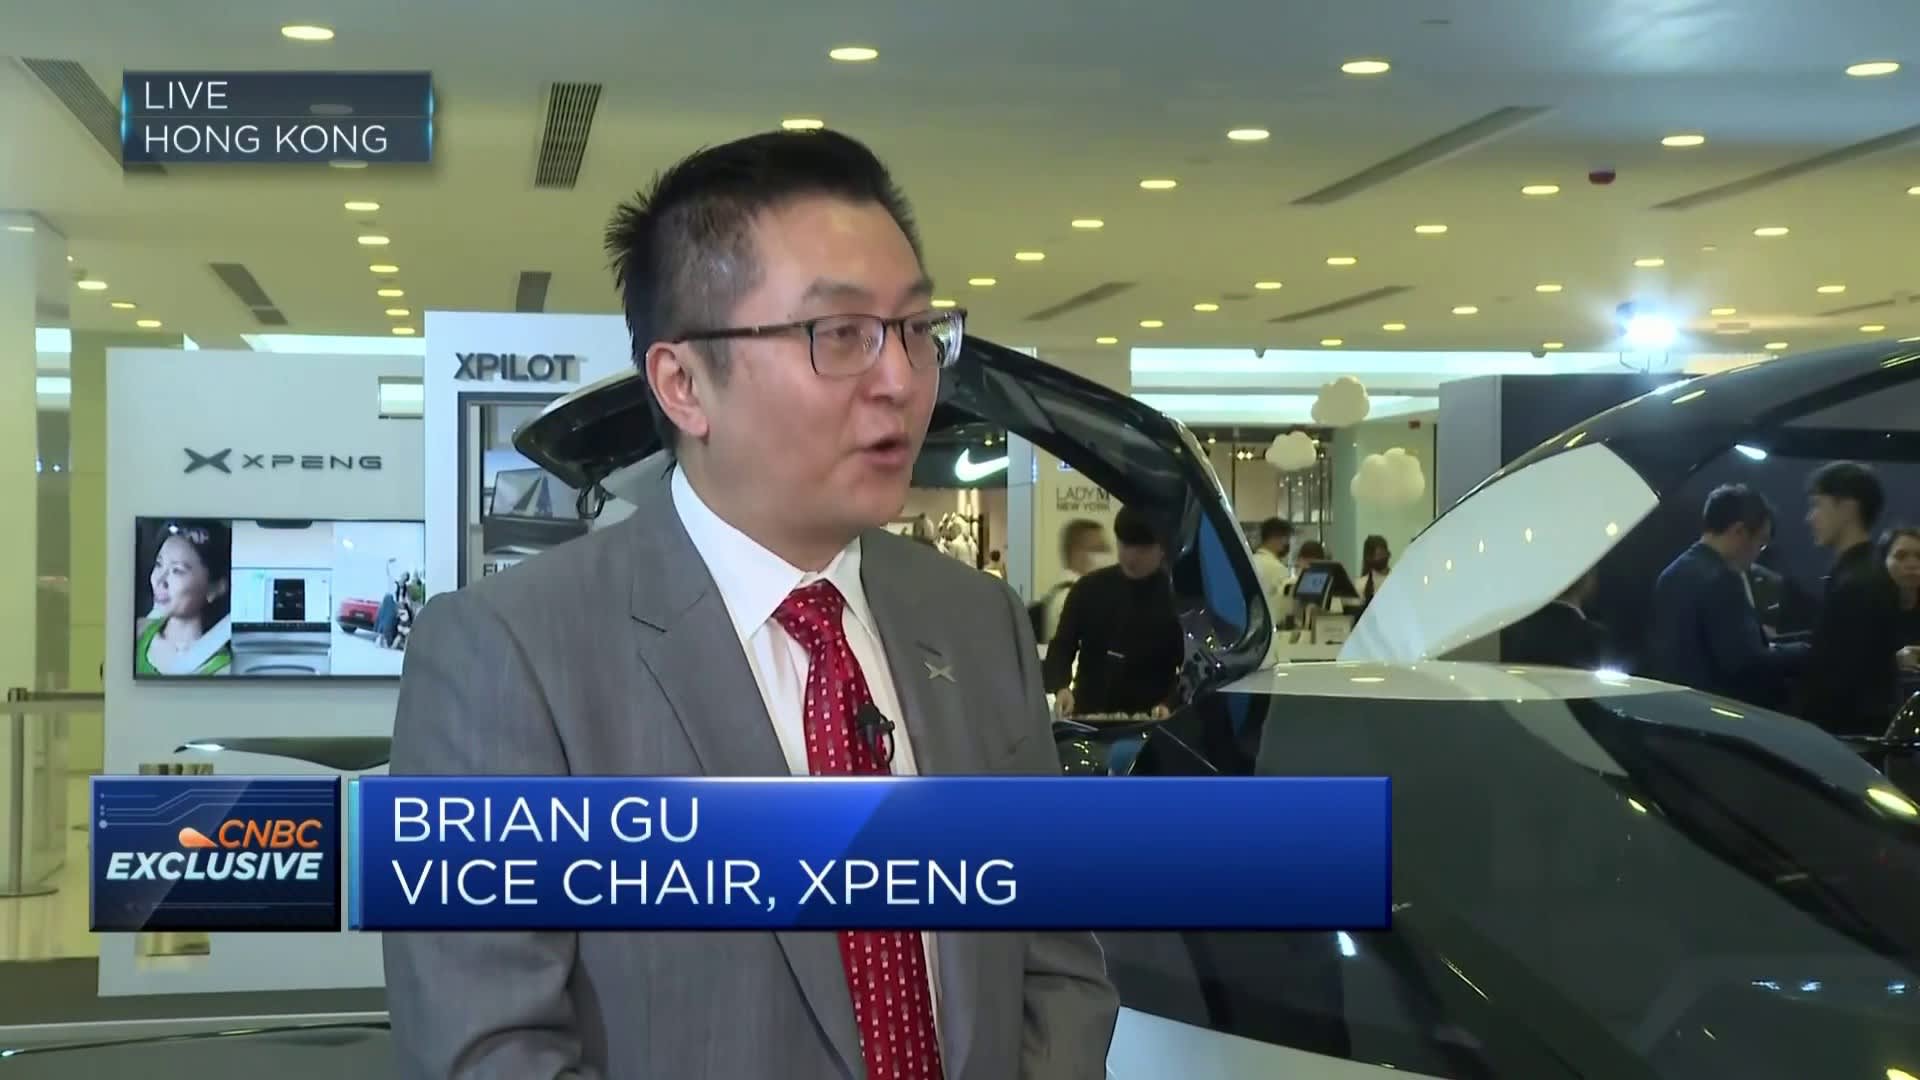 Xpeng vice chair says ‘right now we have no plans’ to enter the U.S. market [Video]